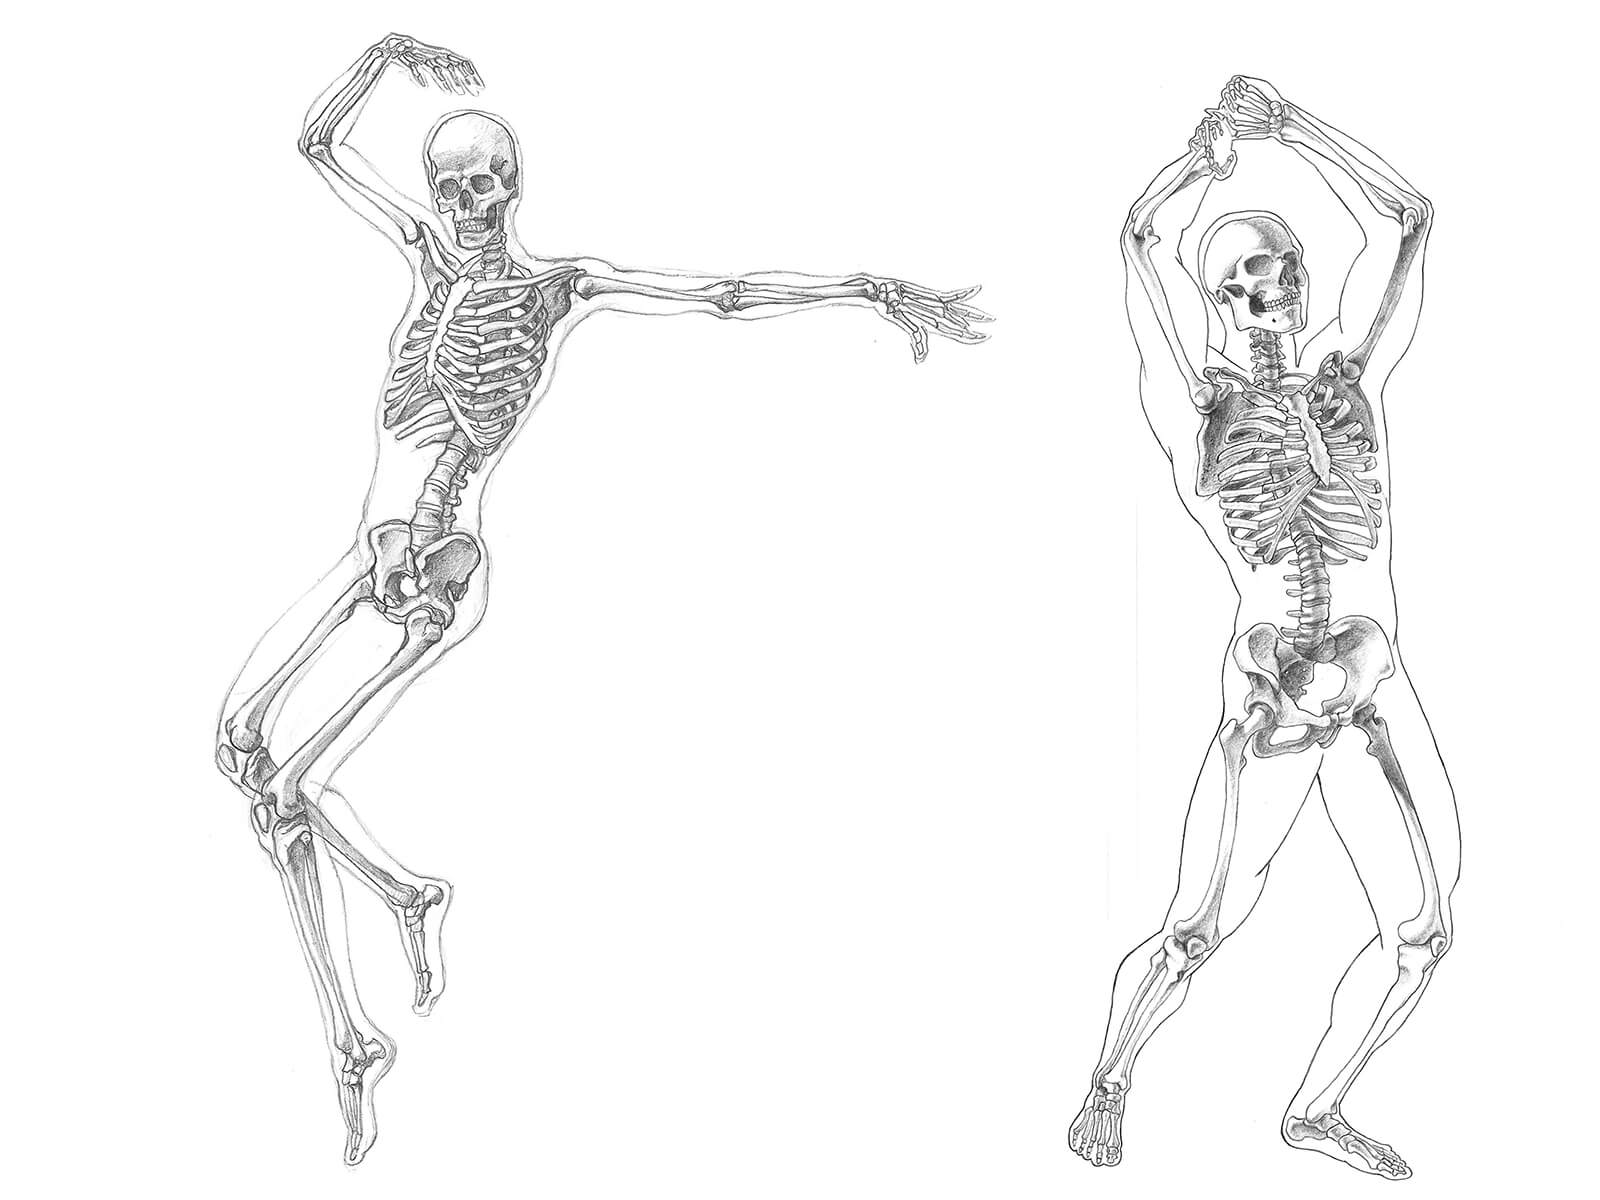 Black-and-white anatomical sketches of two human skeletons, one in a dancing pose, the other pantomiming lifting an ax.